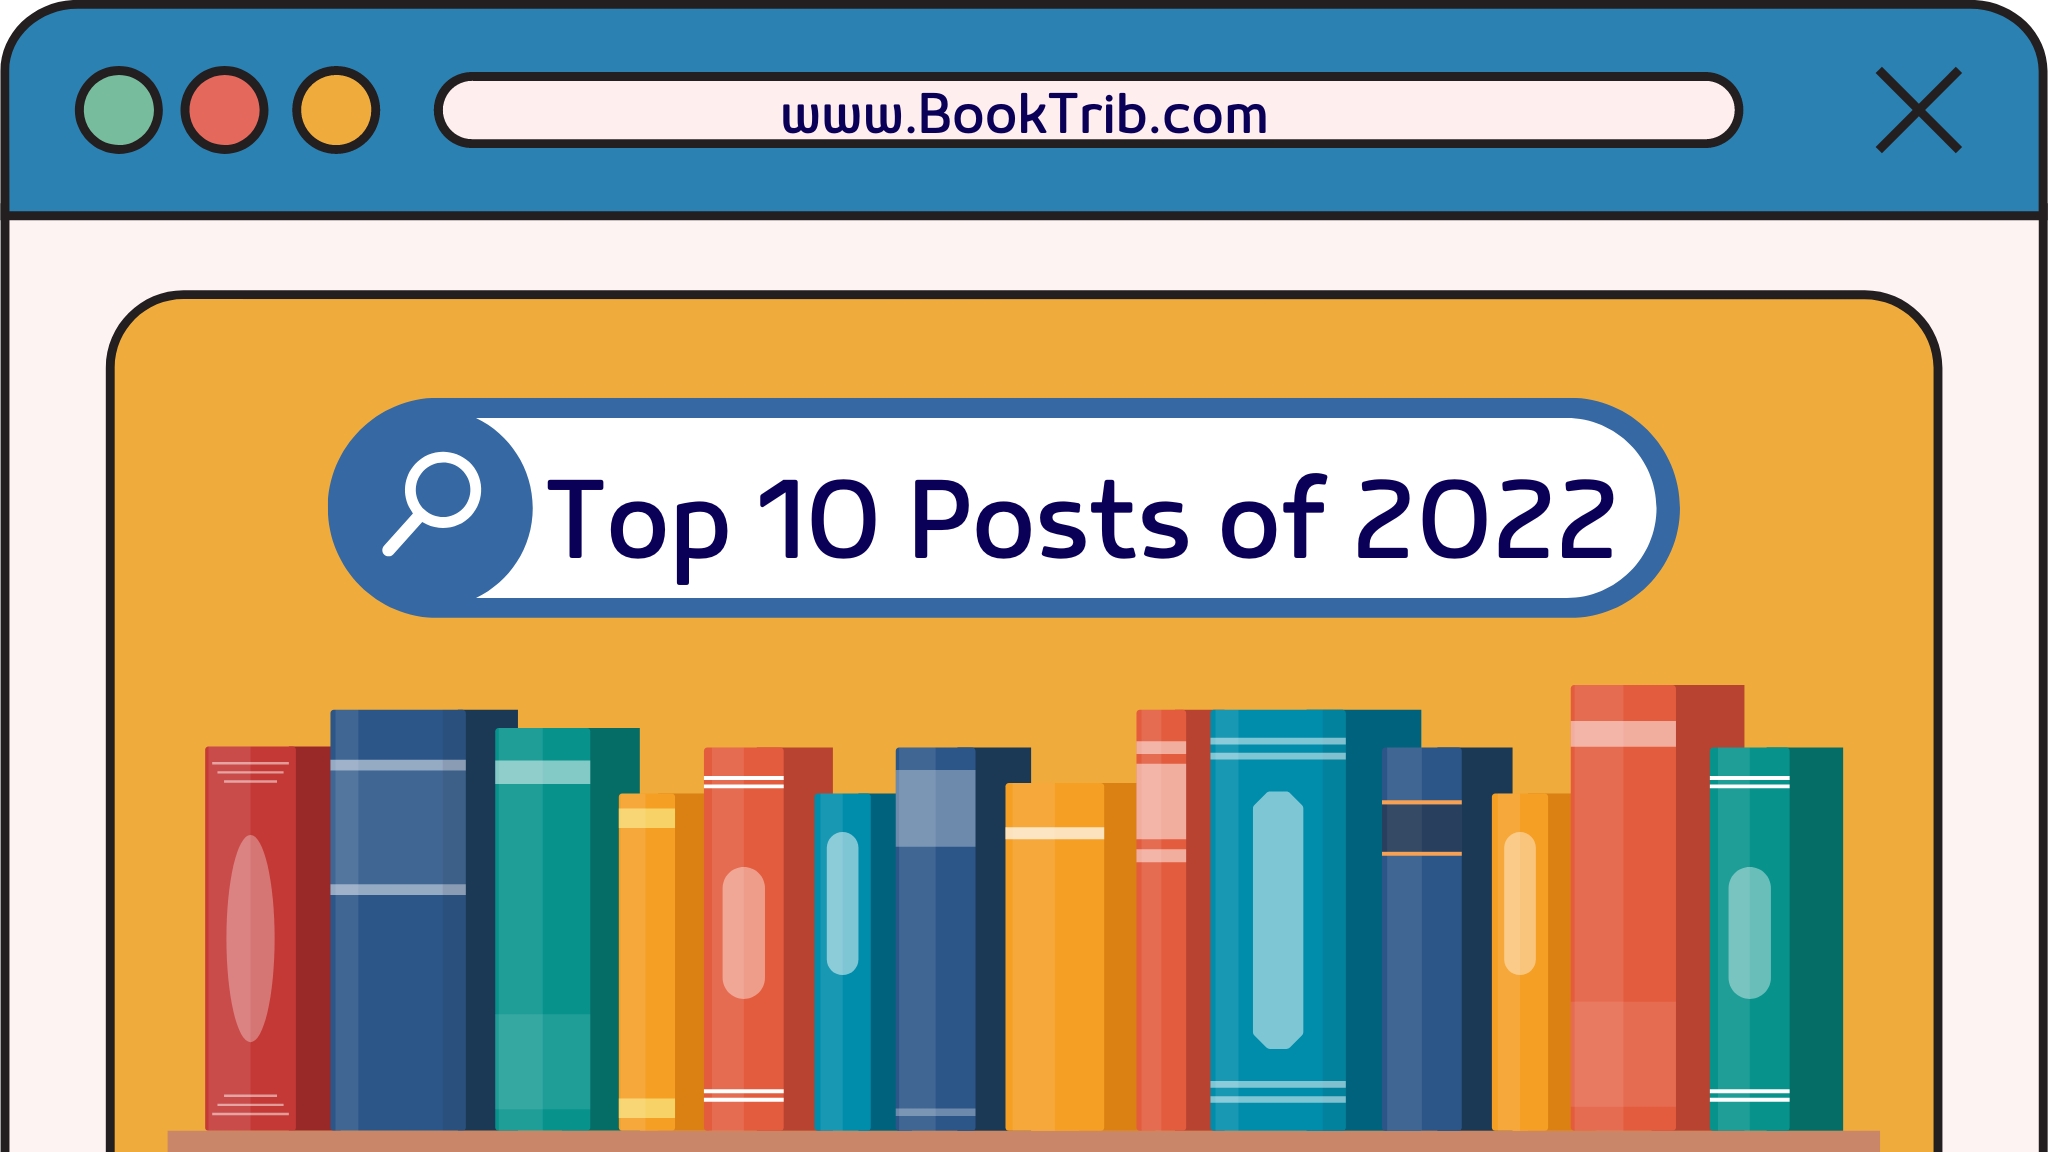 BookTrib's Top 10 Posts of 2022